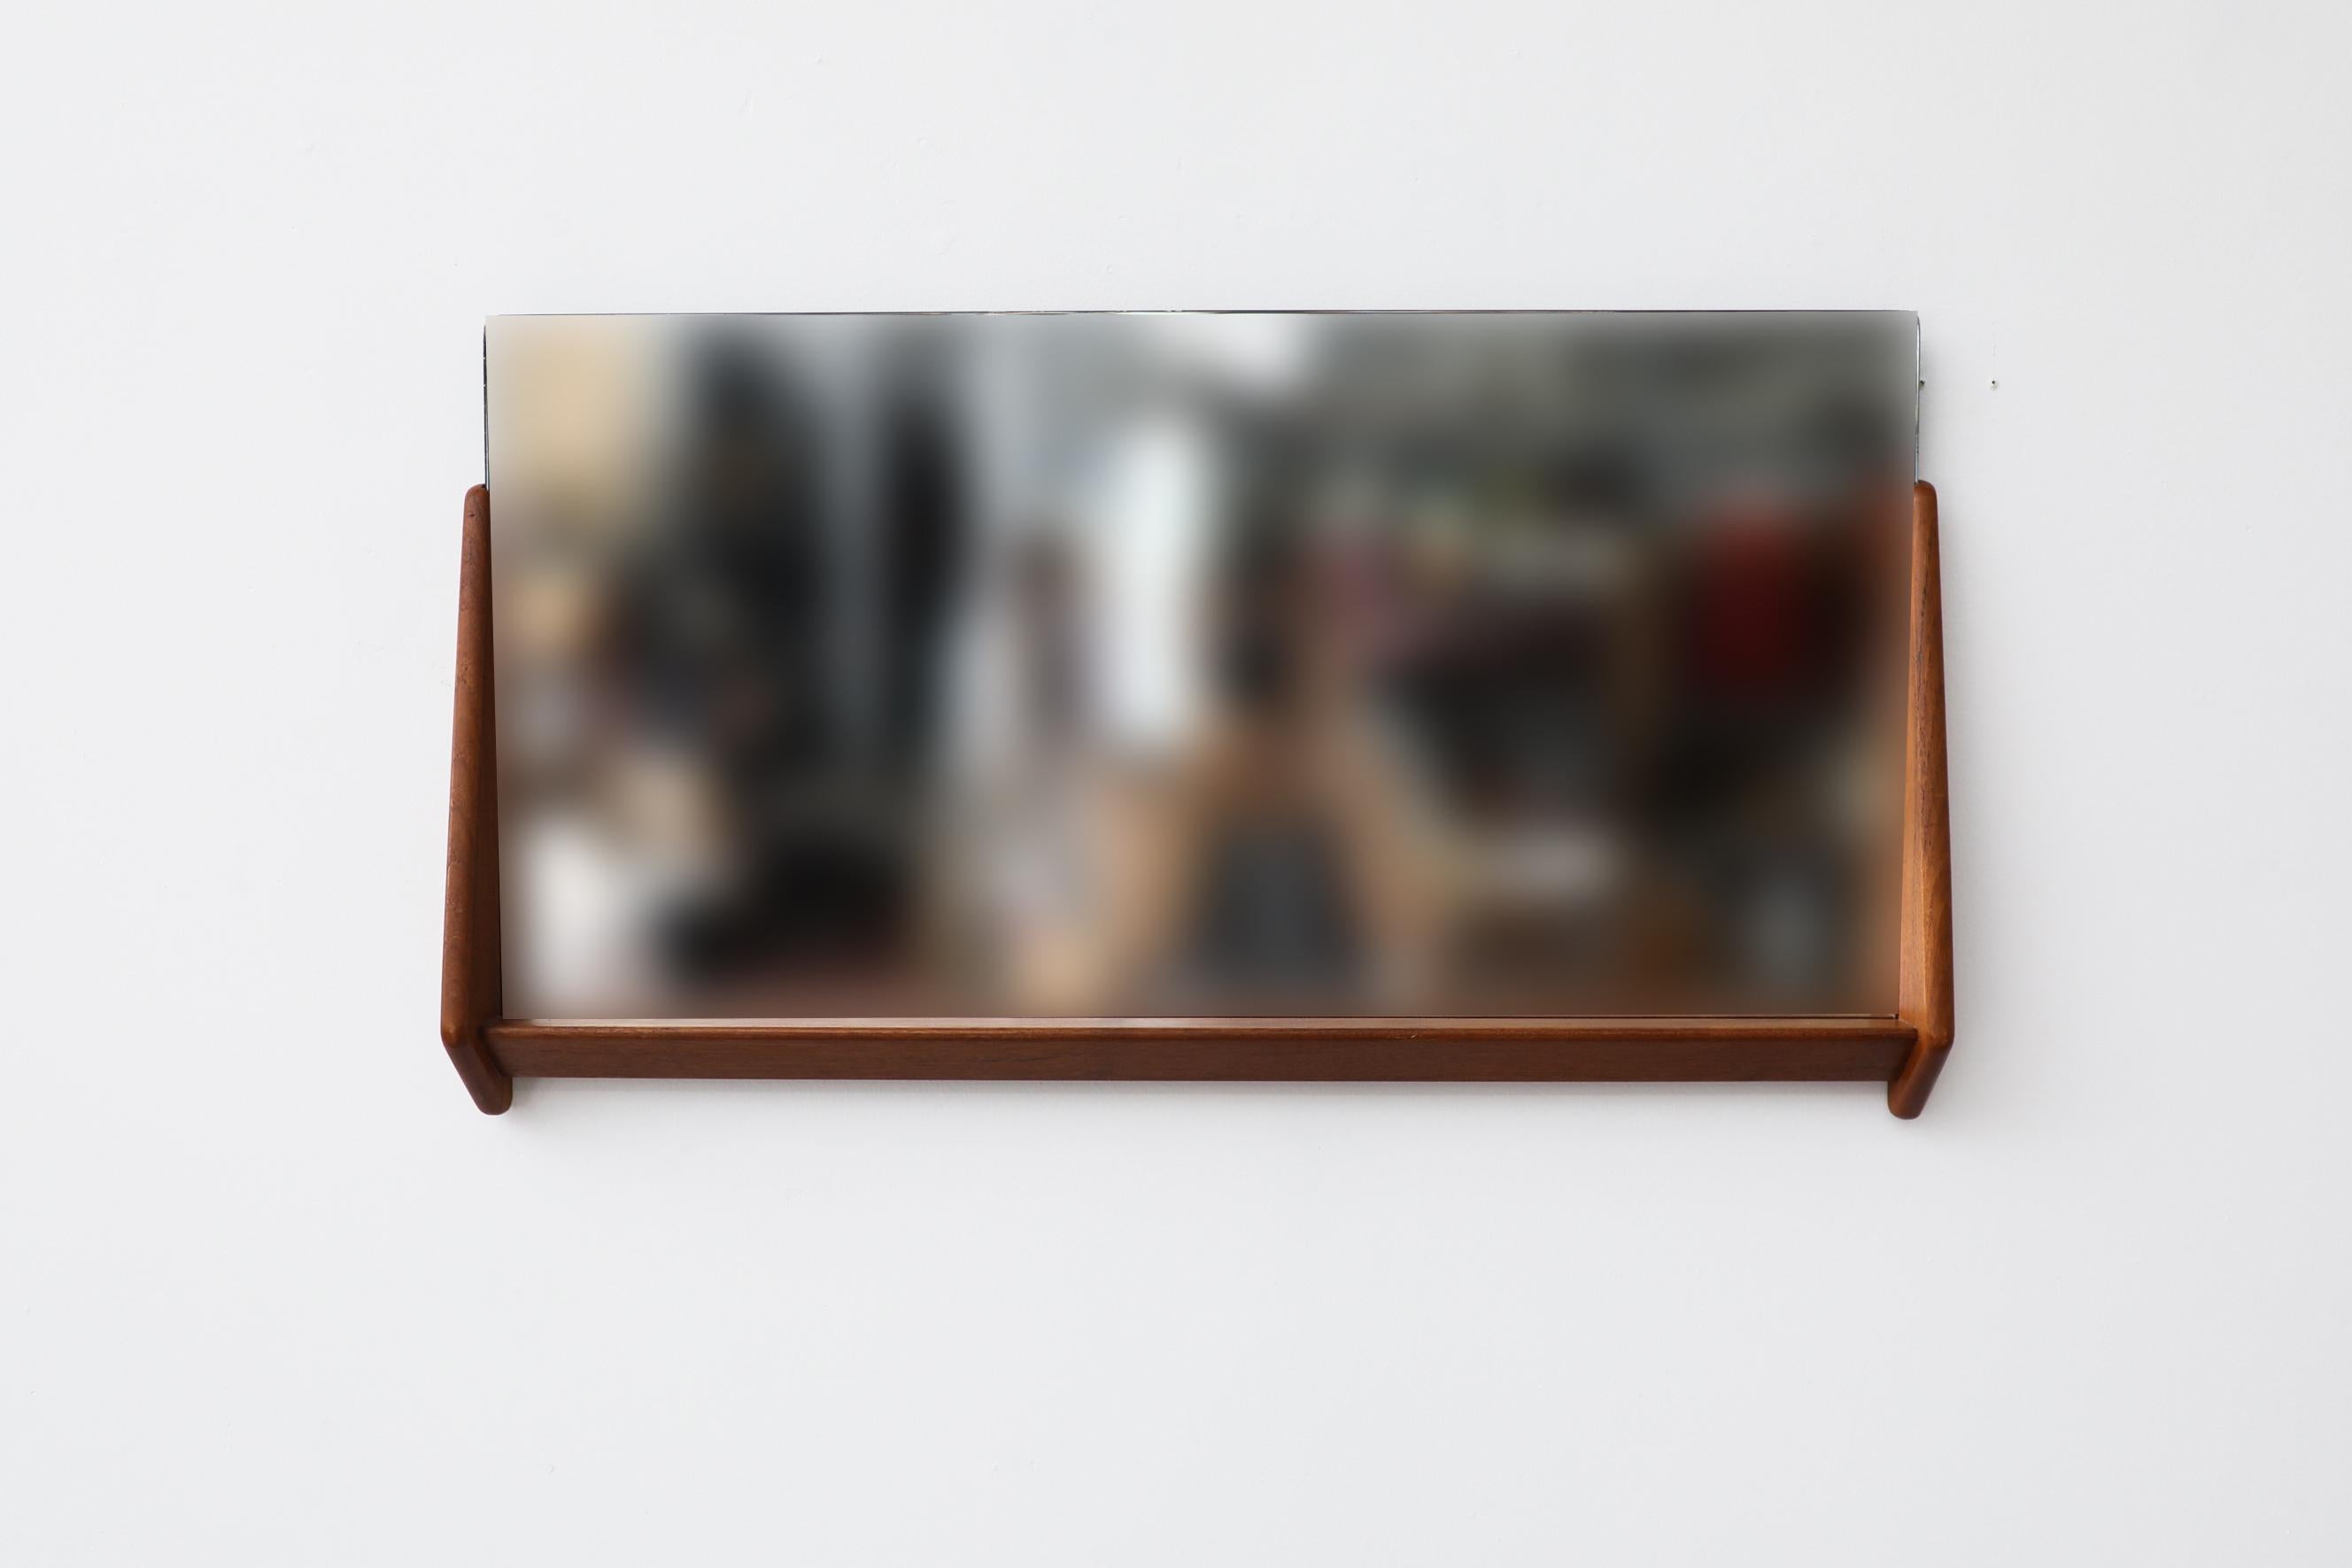 Horizontal wall mounted mirror with teak frame on the bottom half of the mirror, extending slightly on each side and creating a mini shelf under the mirror. The frame has been lightly refinished. The mirror slides into the frame and is in original